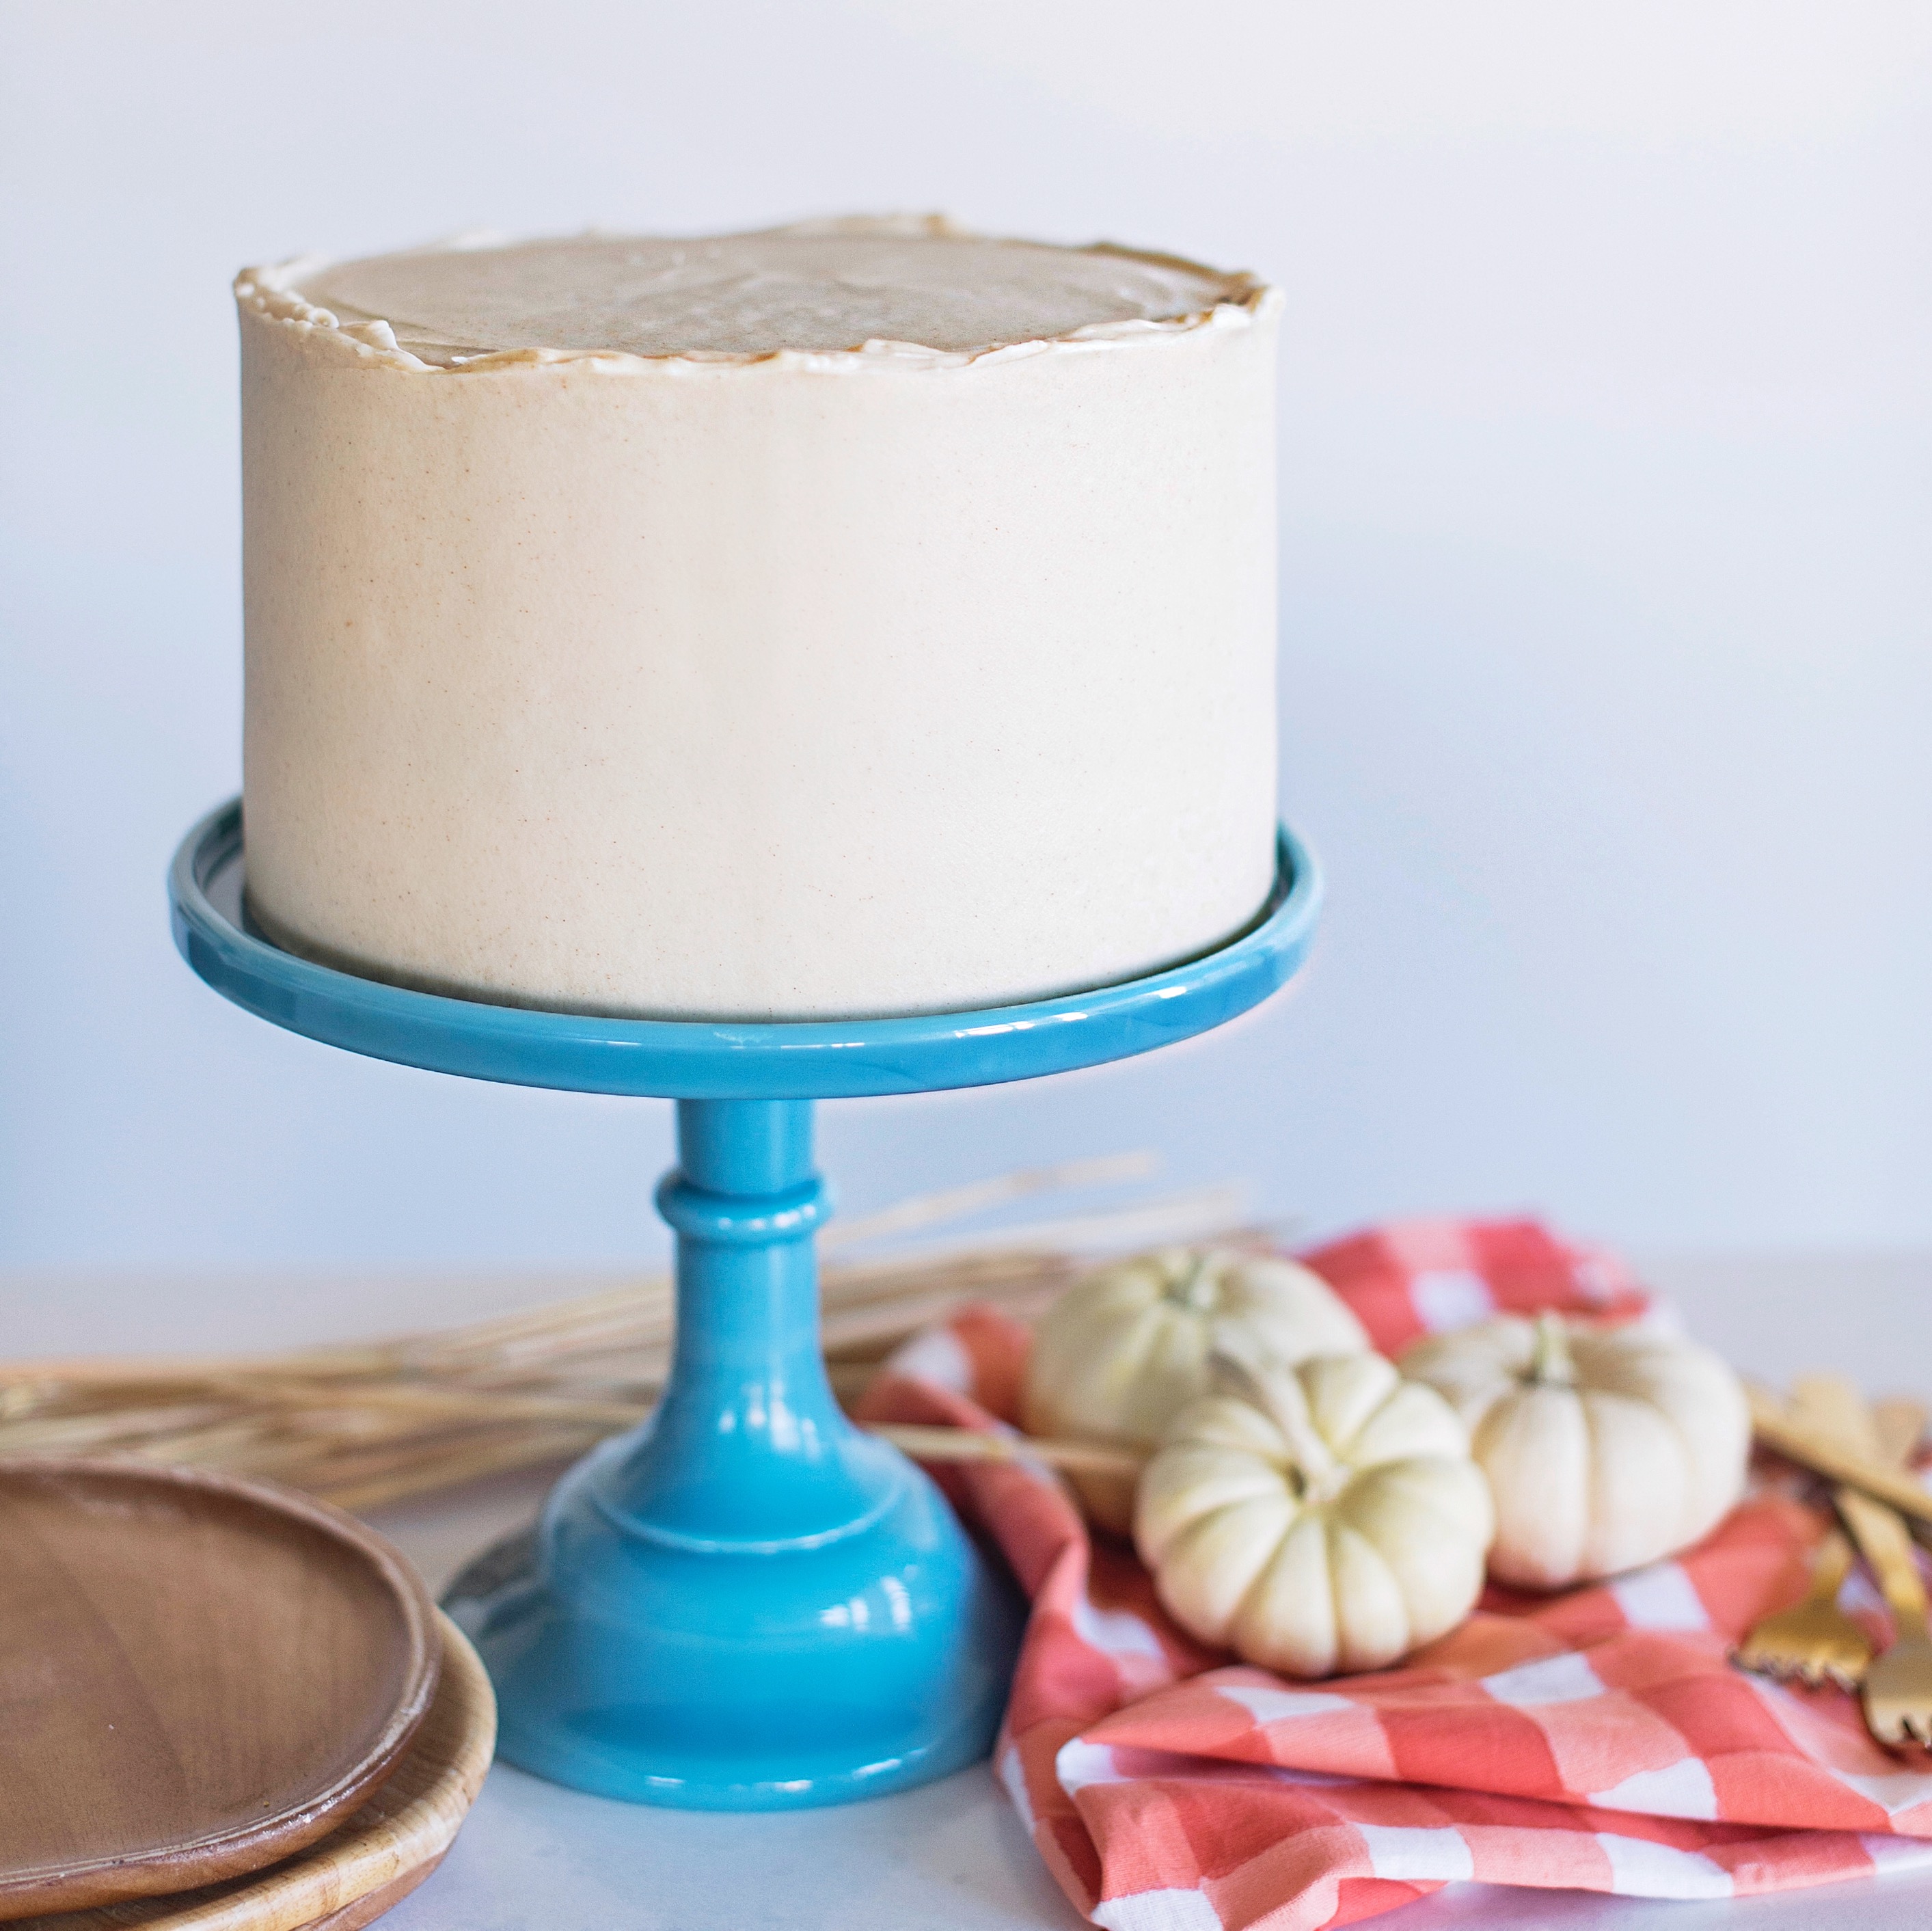 Cake on a cake stand with pumpkins on the table. 